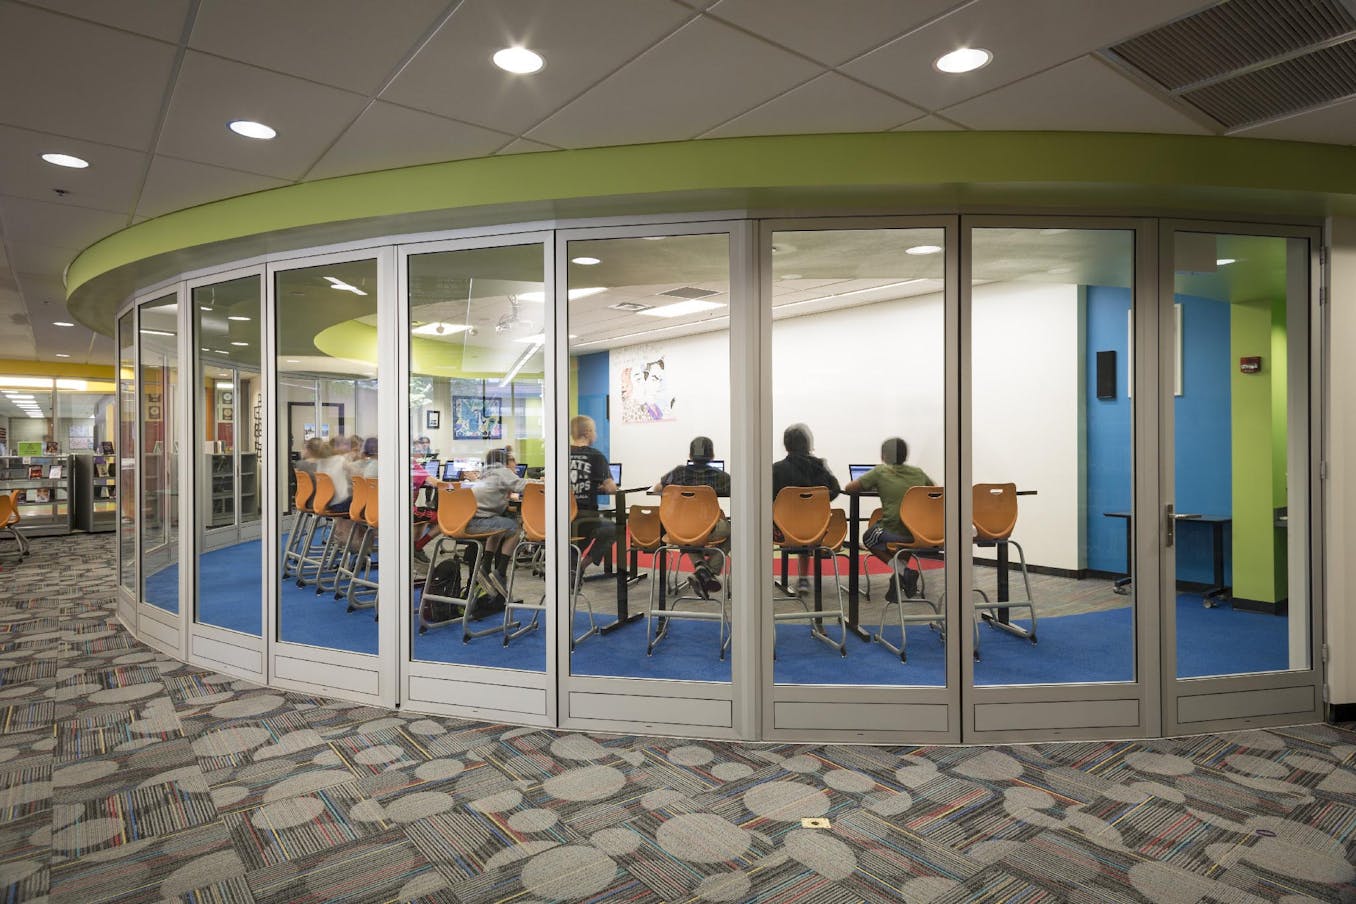 Hadley High School curved glass walls with tempered glass for safety